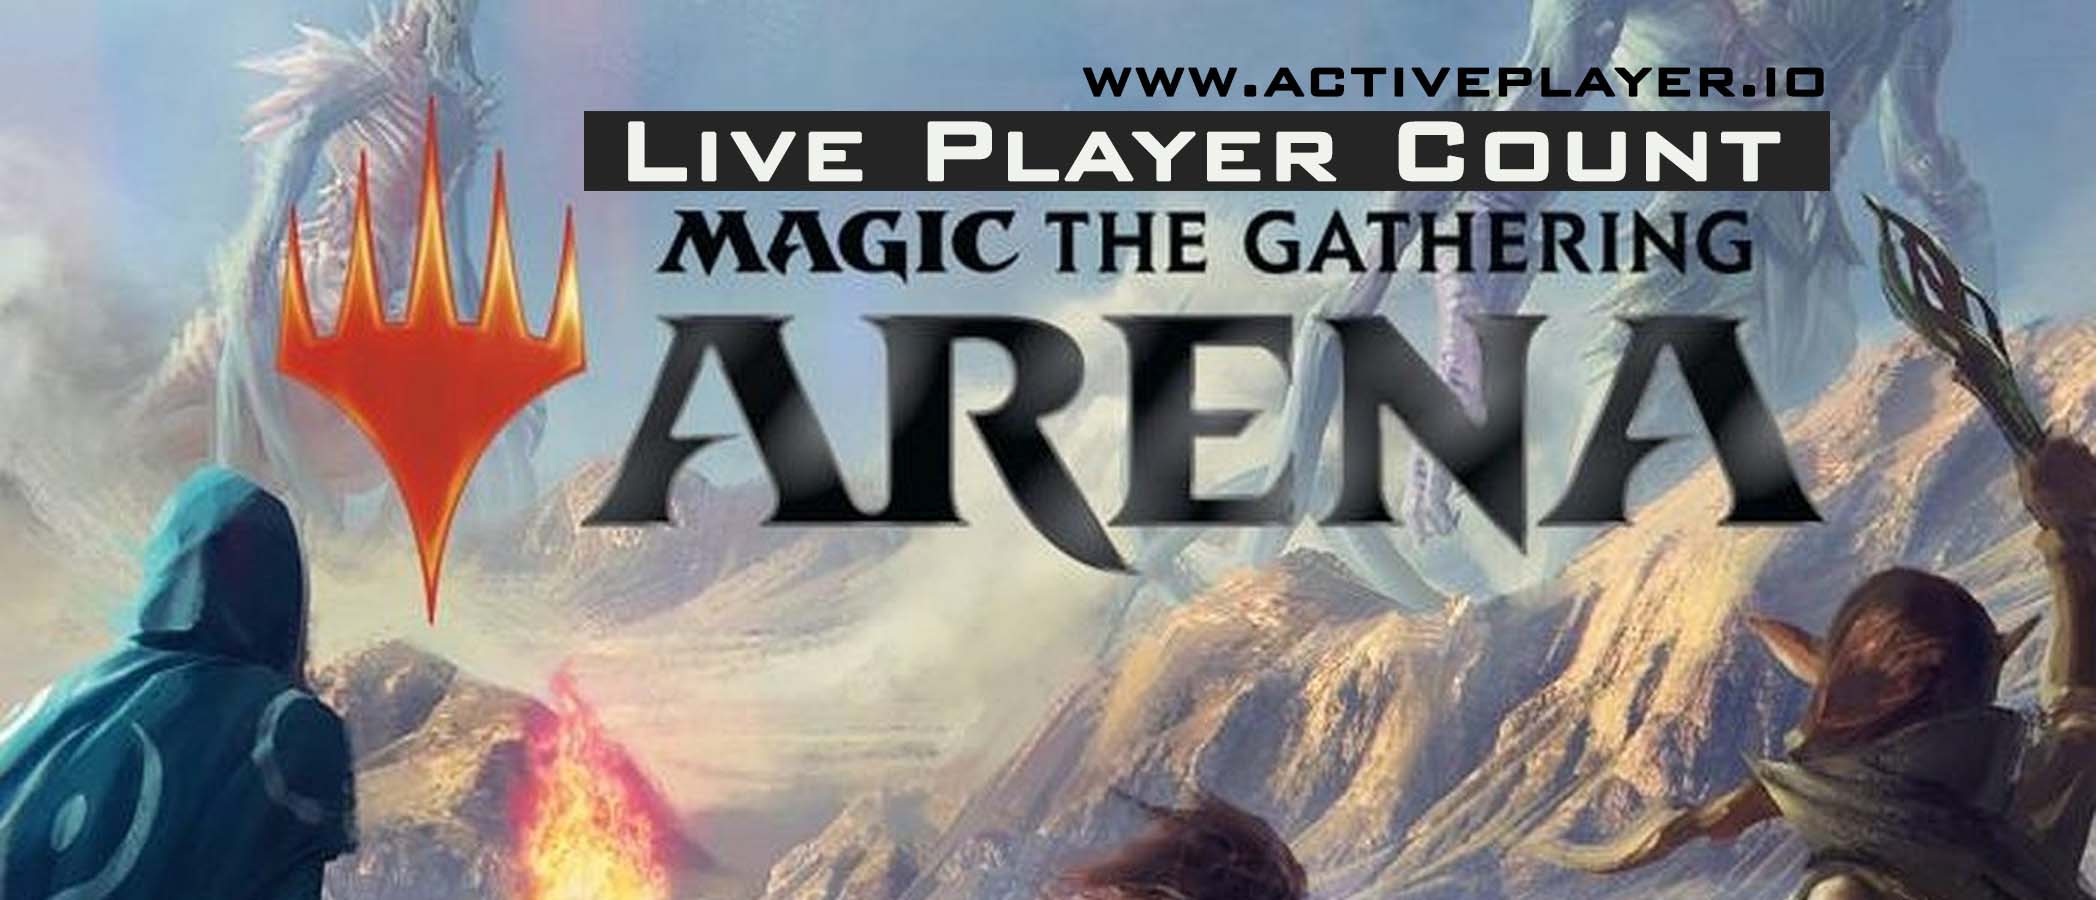 Magic: The Gathering Arena on Steam